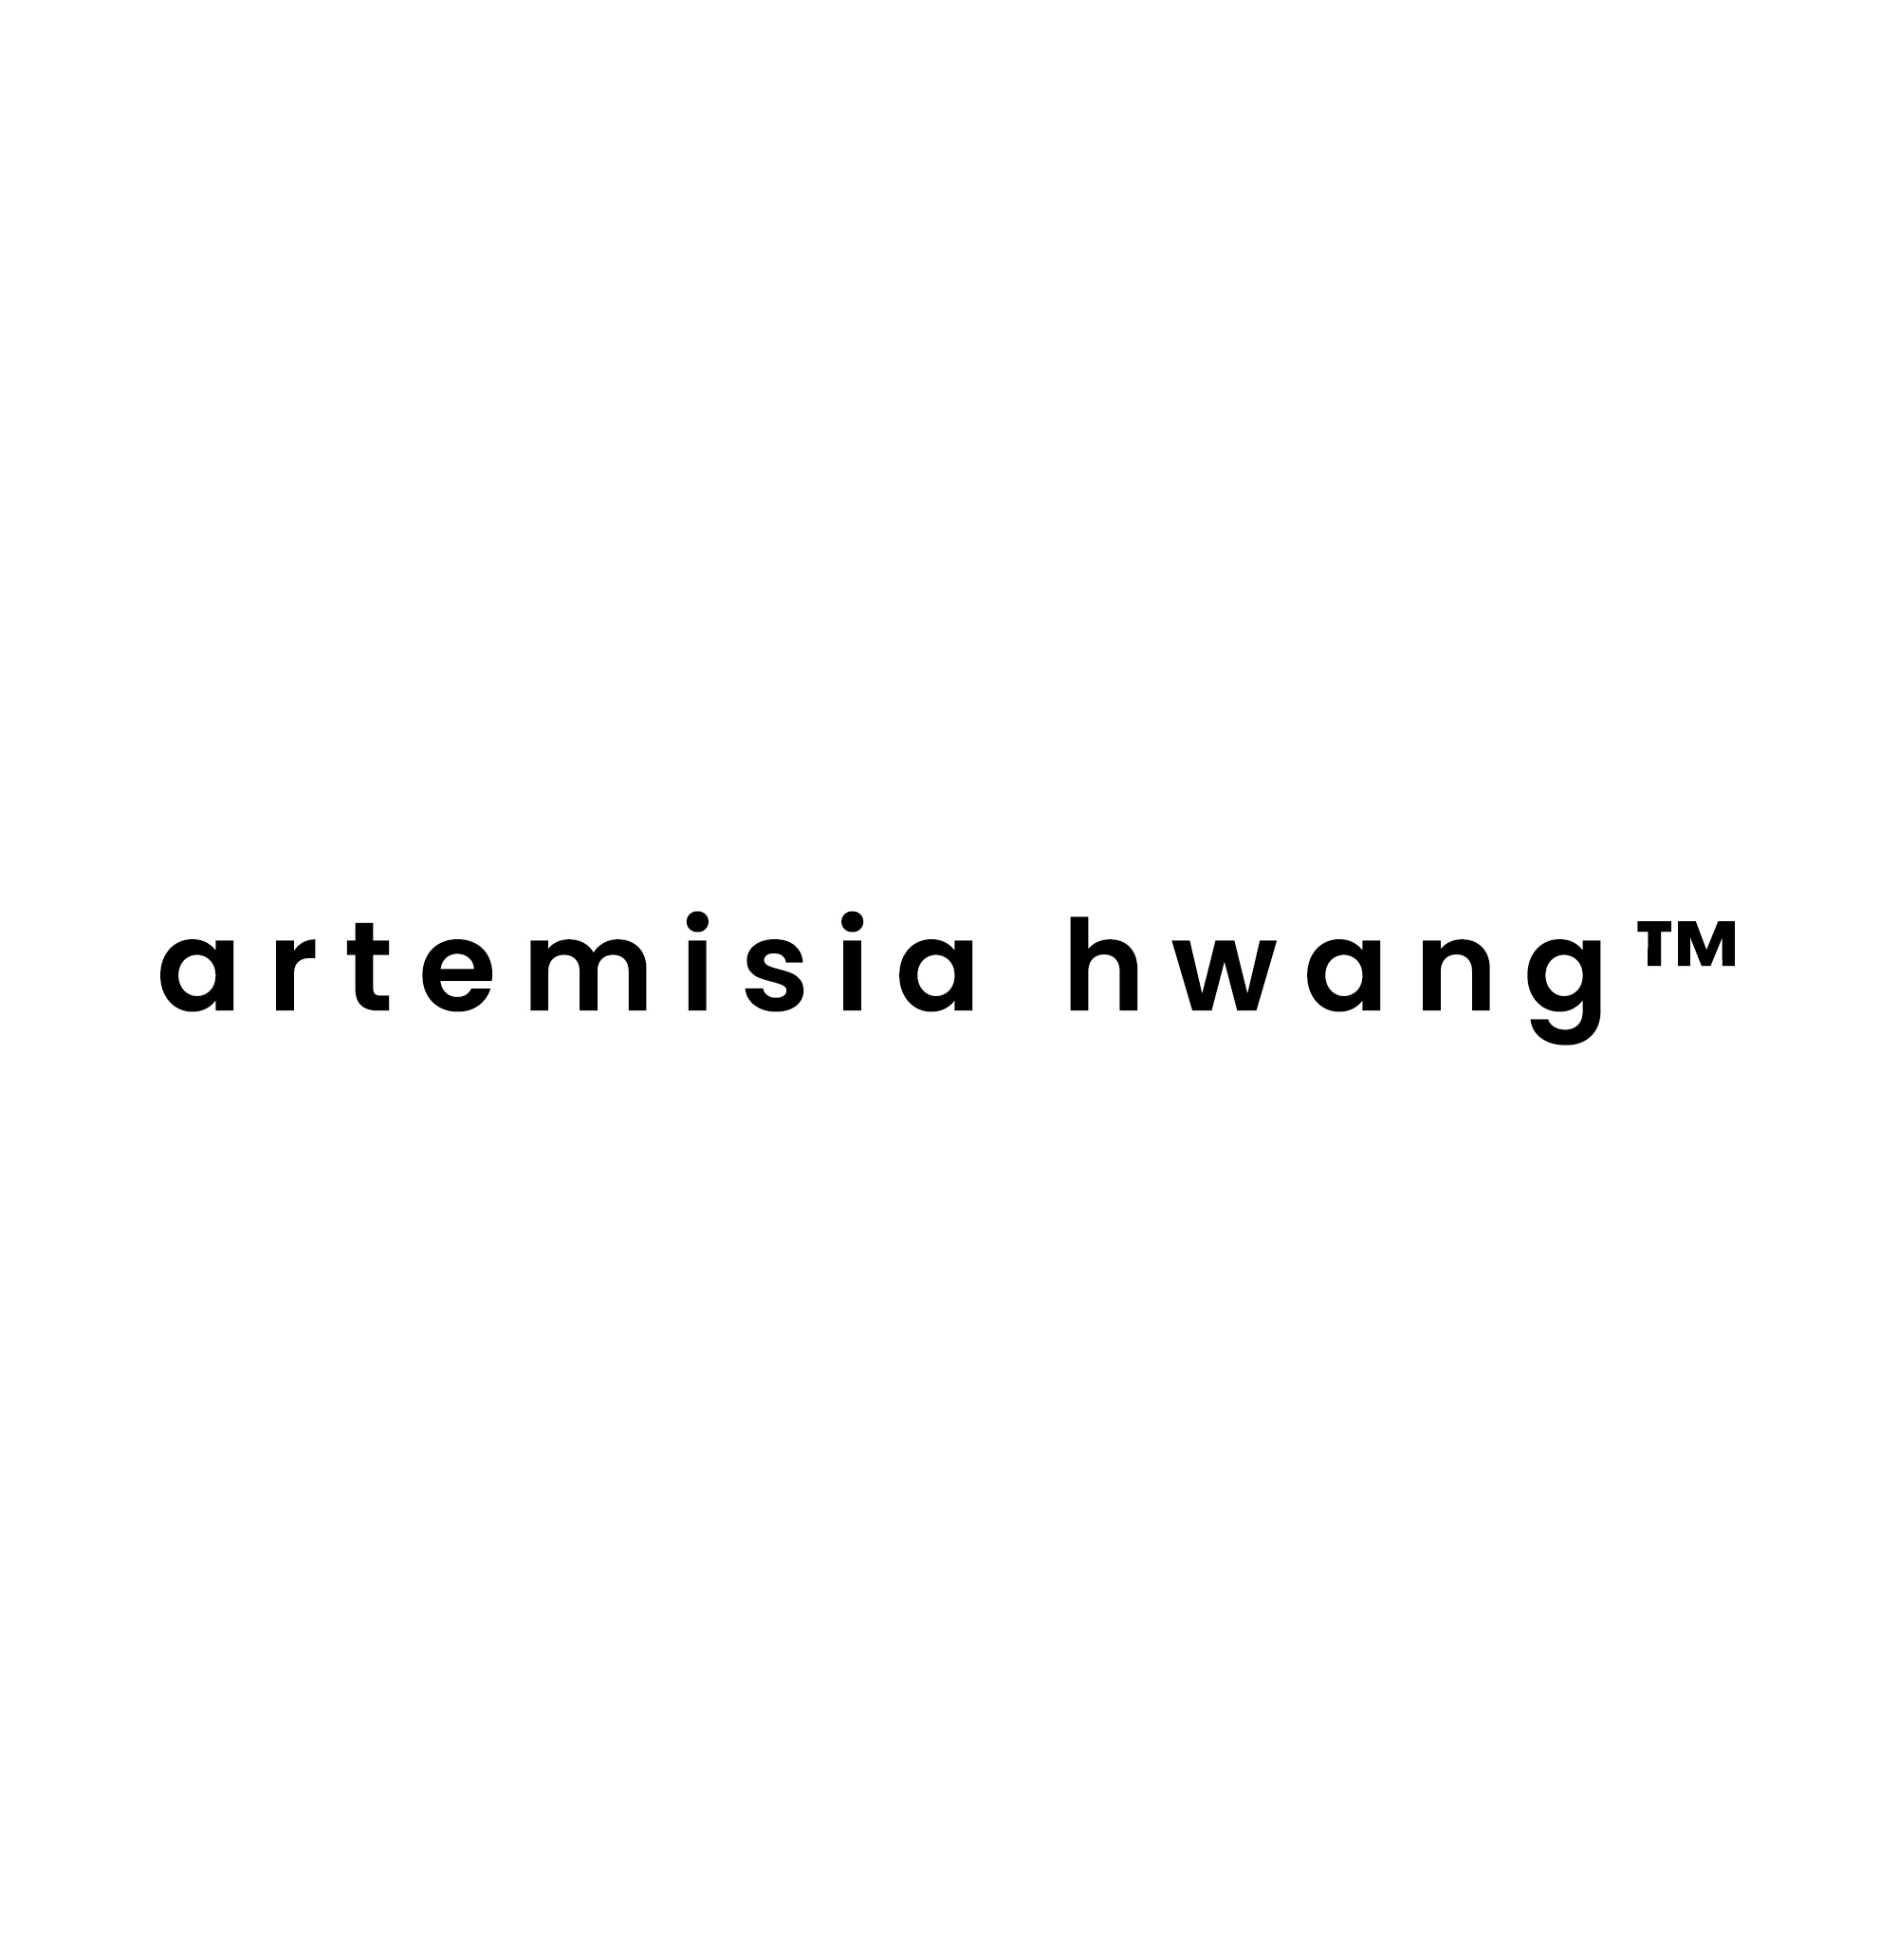 ARTEMISIA HWANG™ Storms the Fashion Space With Luxurious Multifunctional Handbags